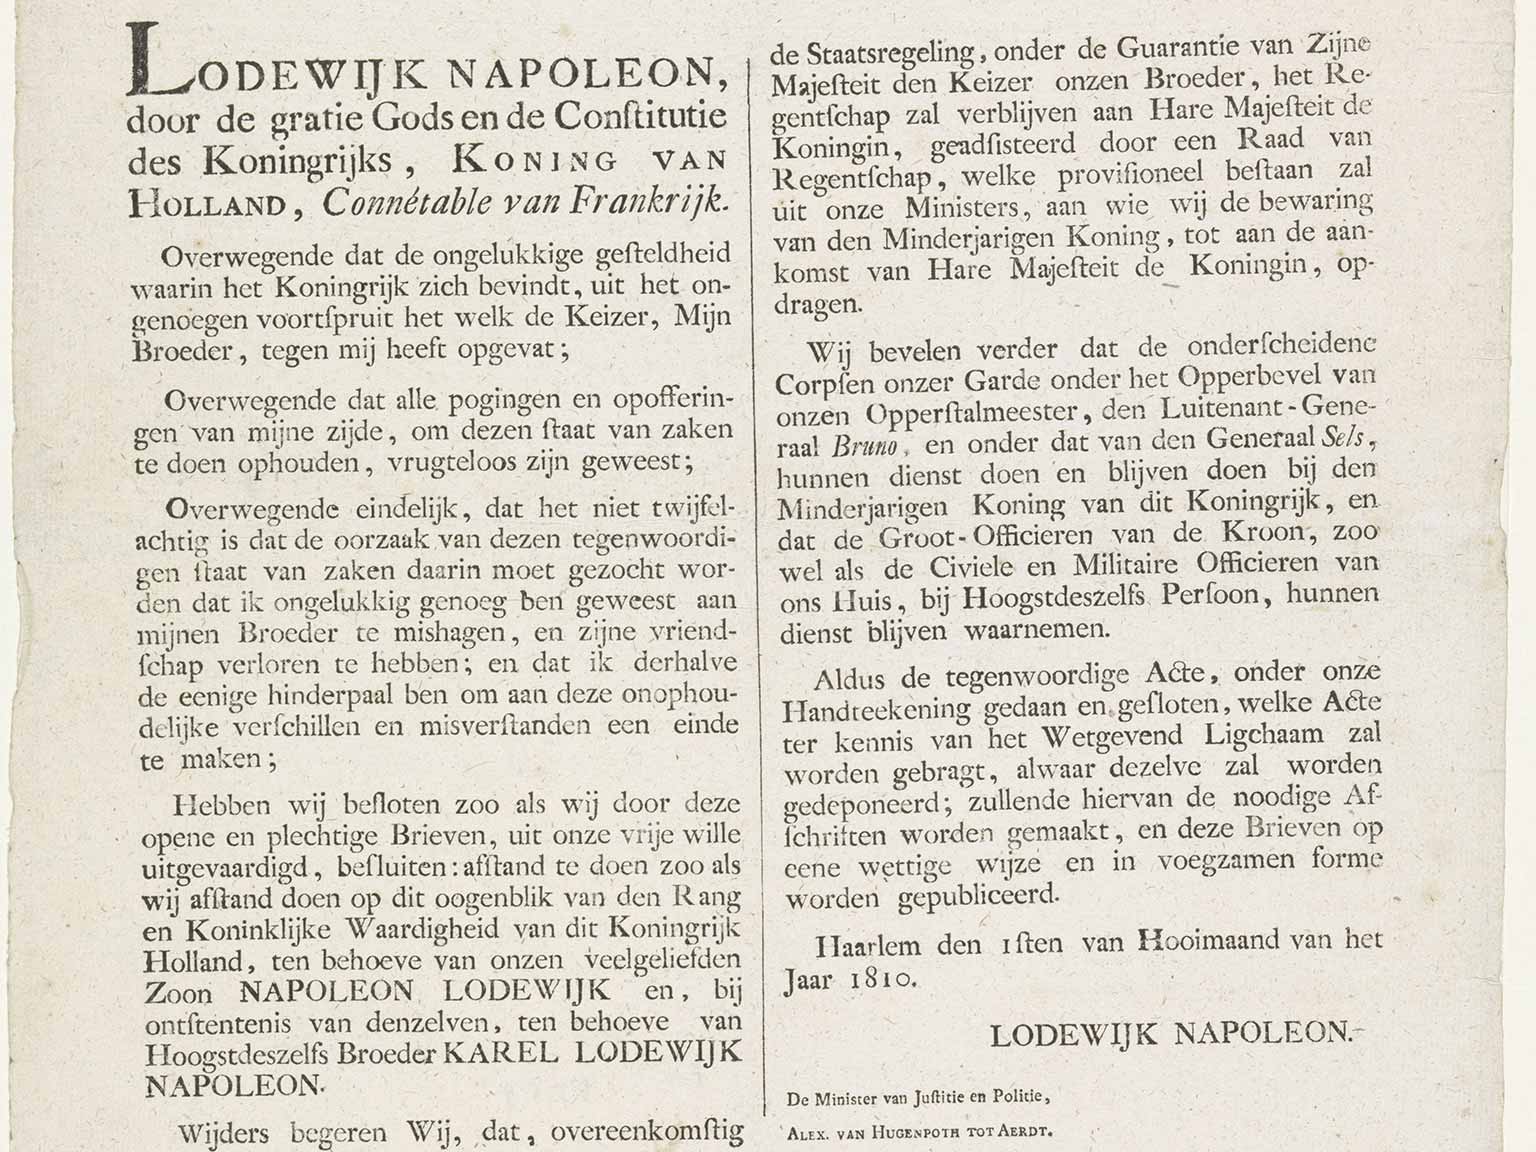 Part of the Act of Abdication of King Louis Napoleon of Holland, July 1st, 1810